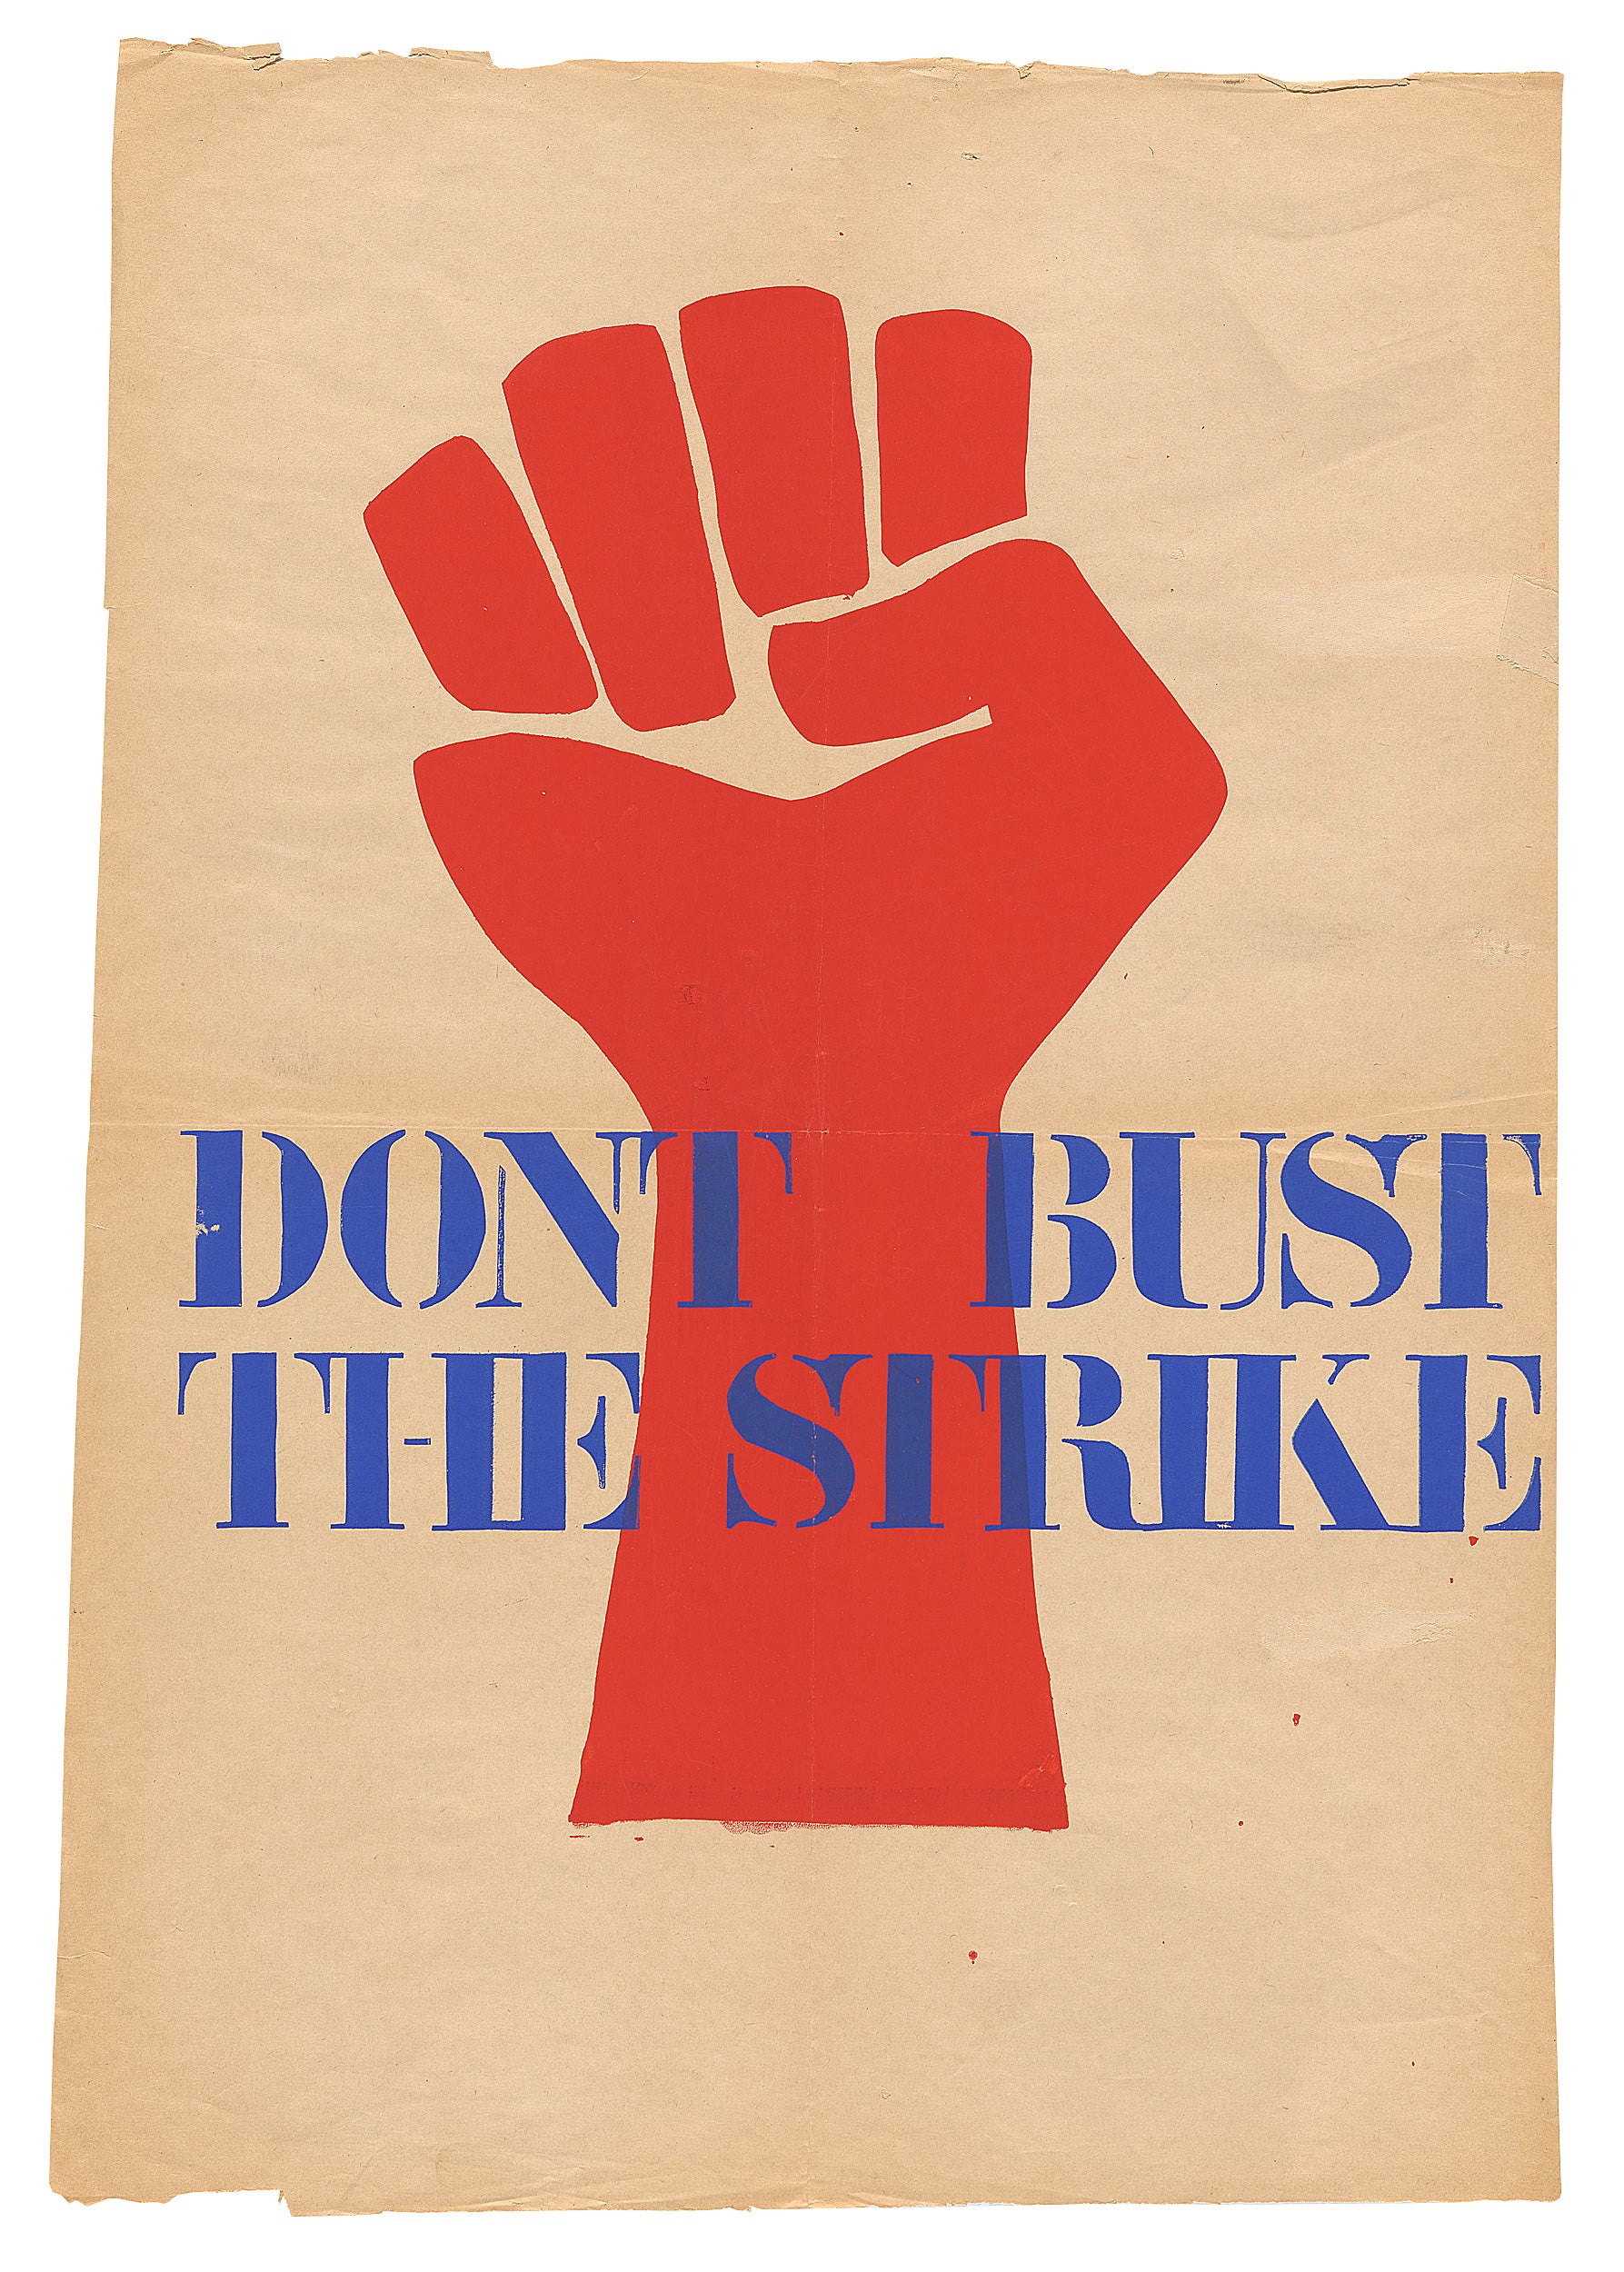 "Don't bust the strike" poster.